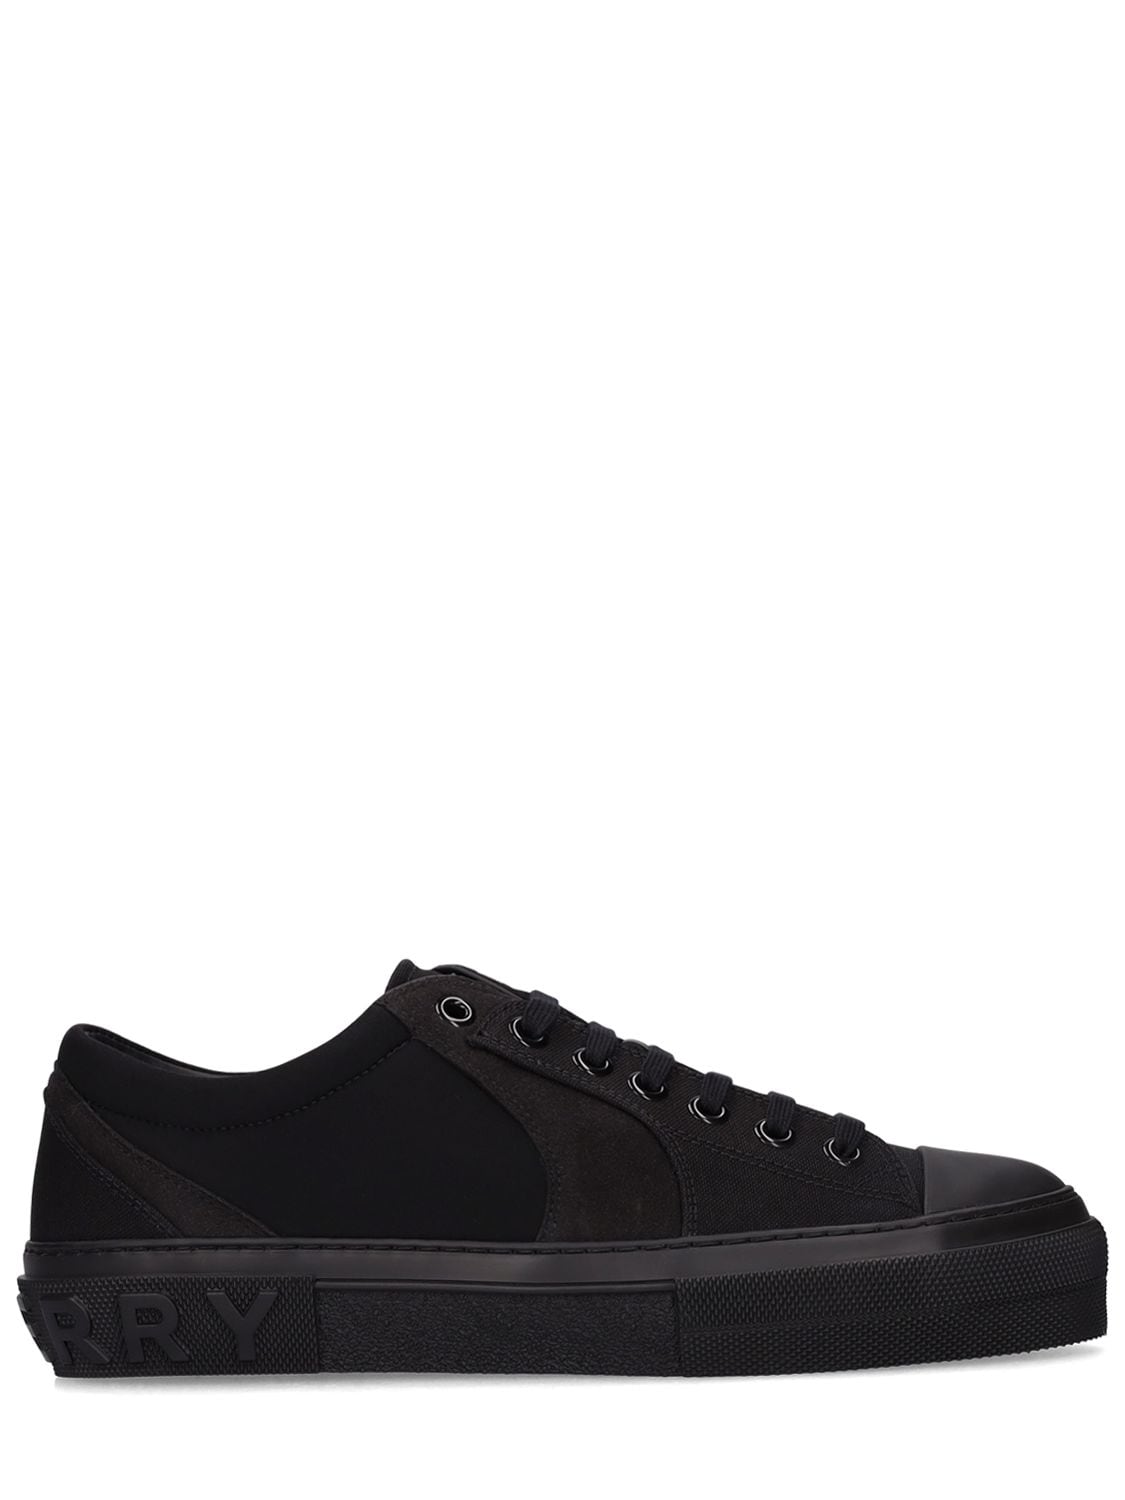 BURBERRY Kai Canvas Low Top Sneakers